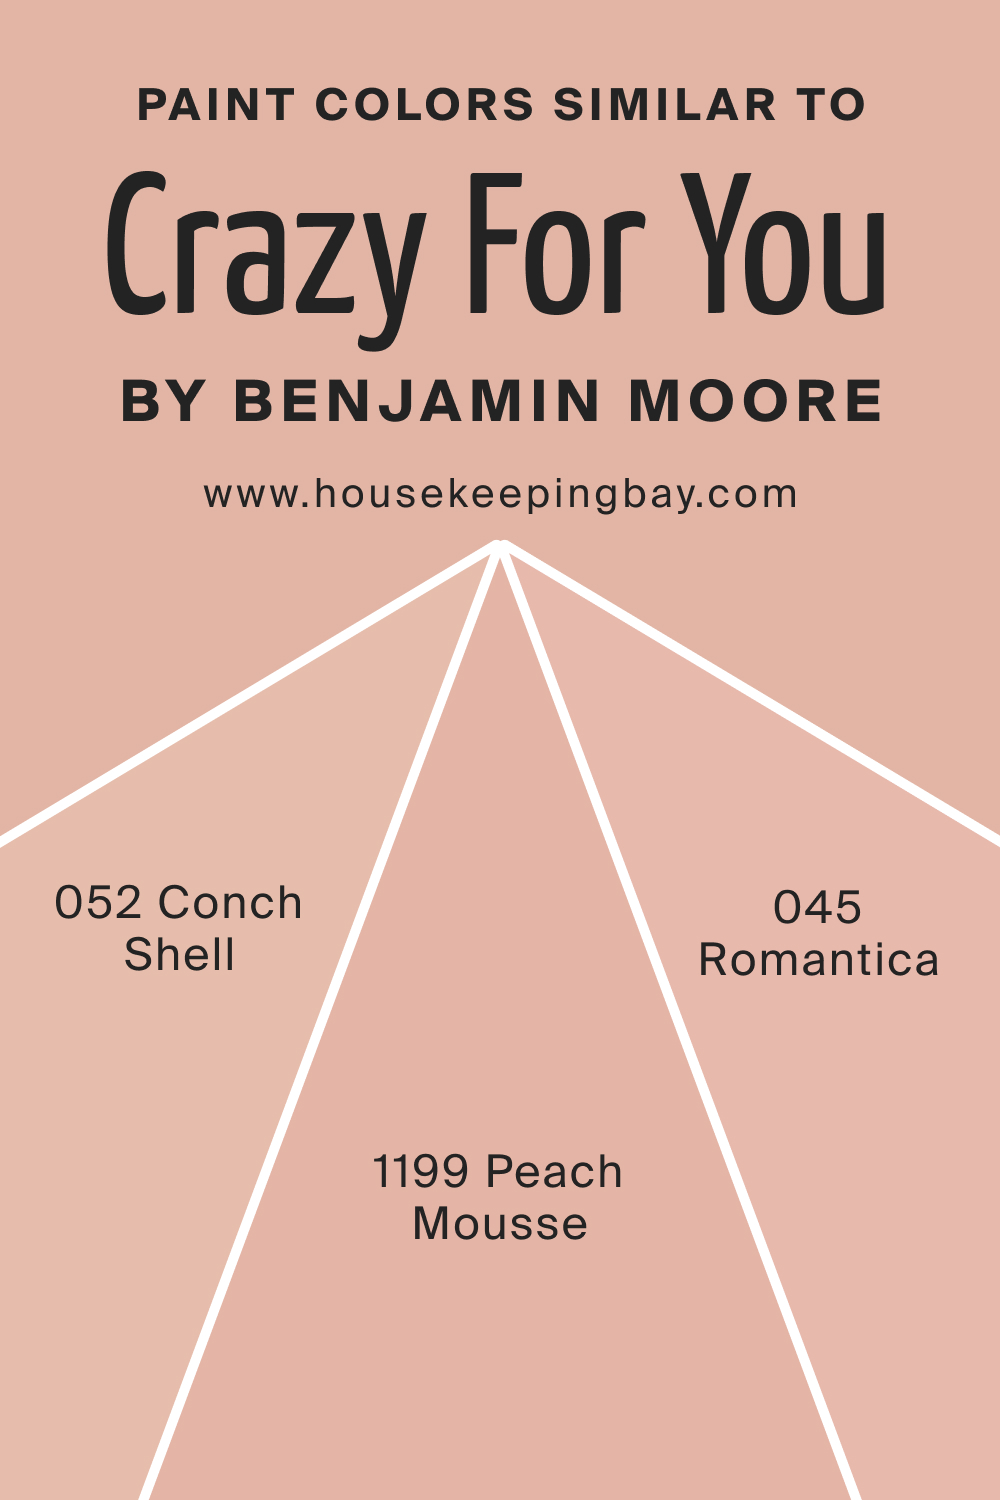 Paint Colors Similar to BM Crazy For You 053 by Benjamin Moore